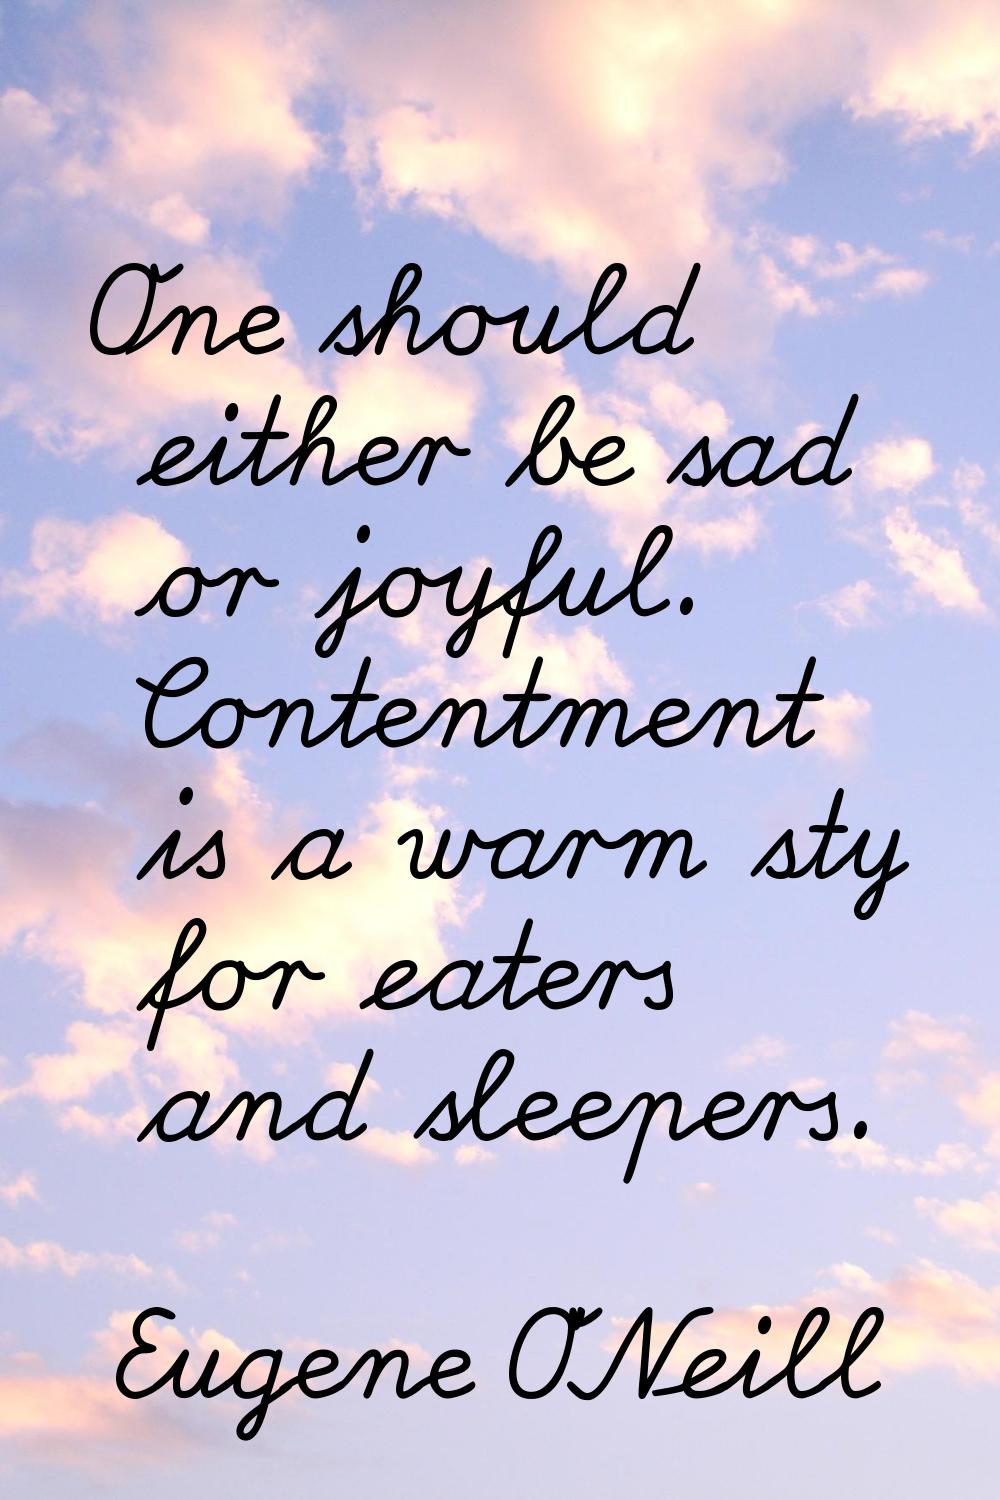 One should either be sad or joyful. Contentment is a warm sty for eaters and sleepers.